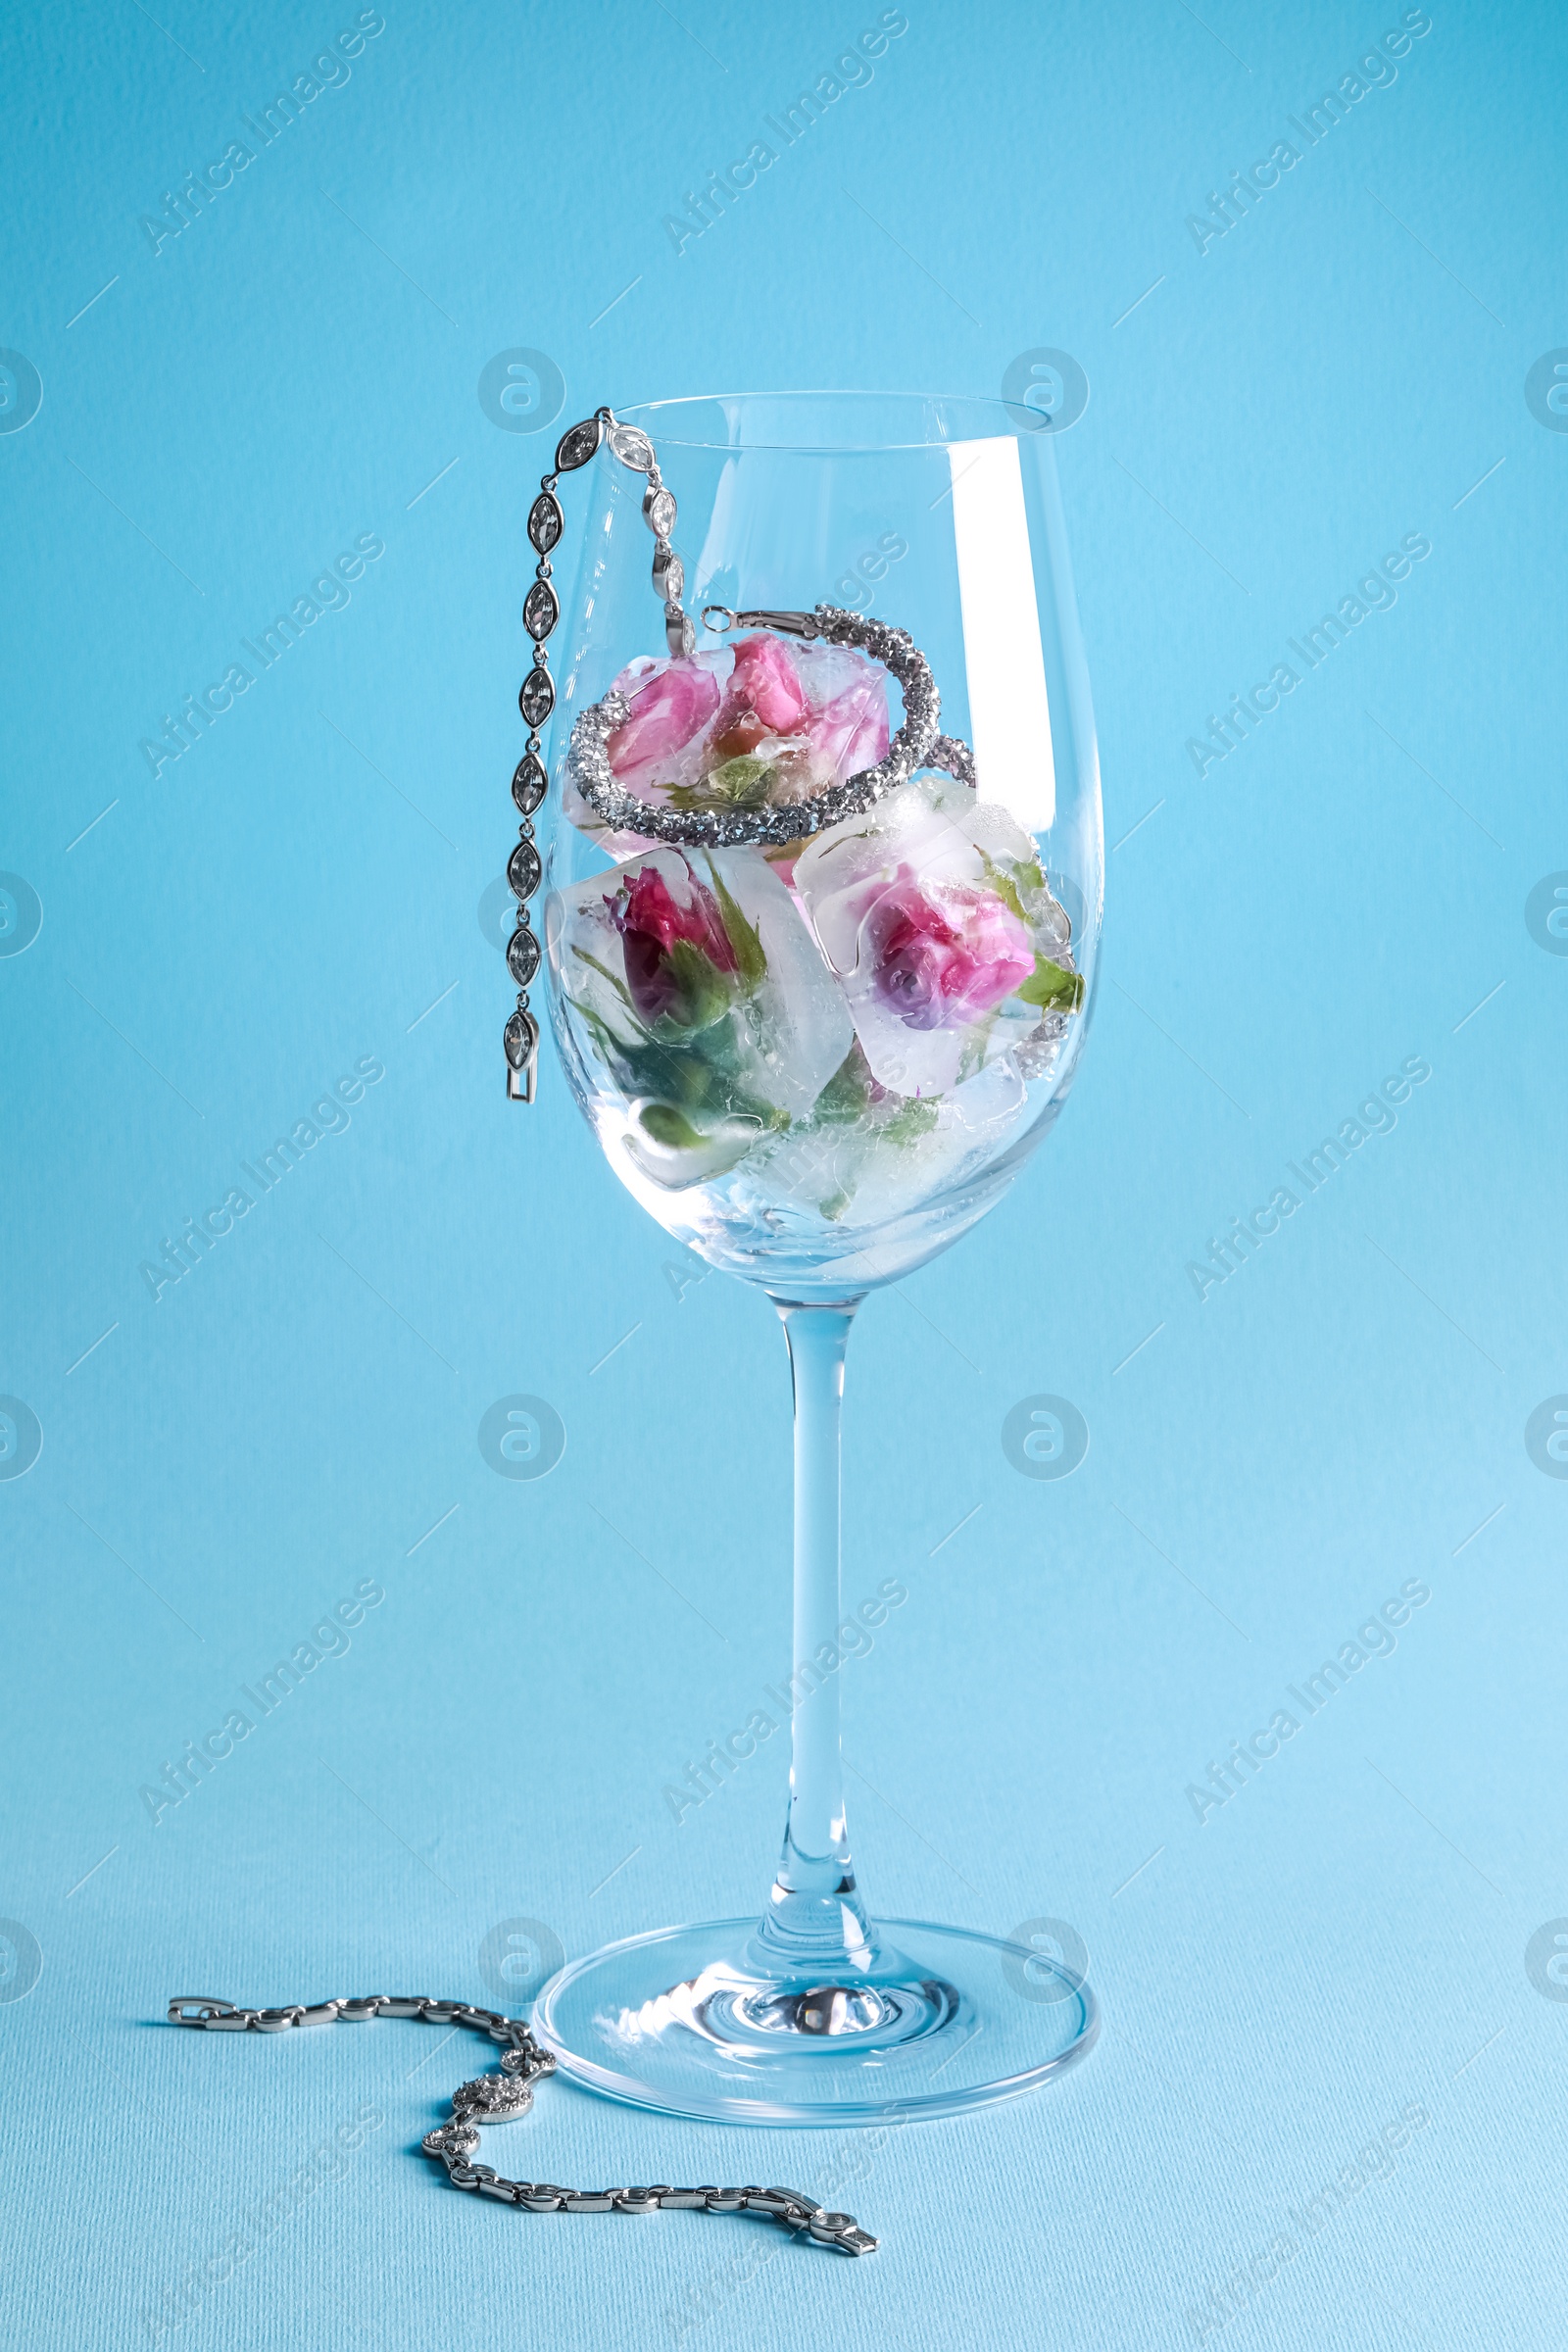 Photo of Elegant jewelry. Stylish presentation with luxury earrings, bracelets and frozen roses in glass on light blue background